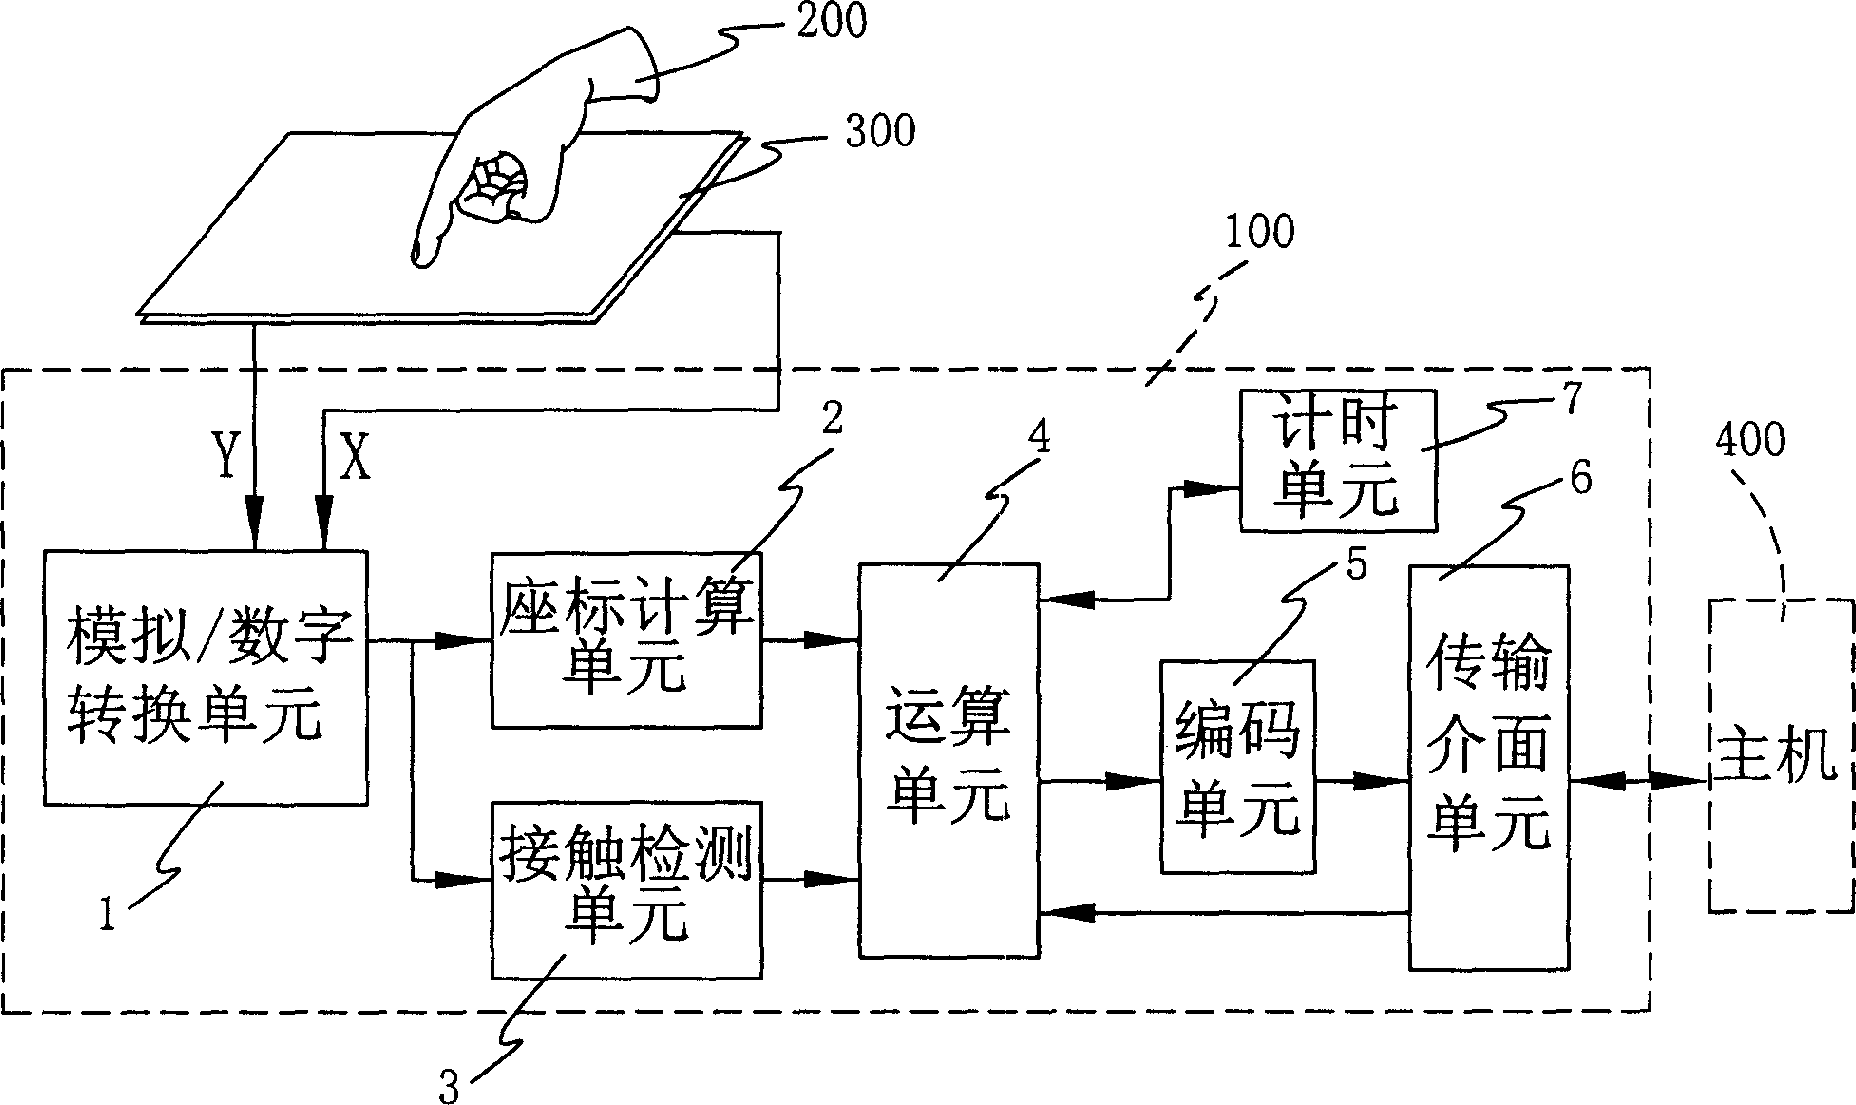 Method for identifying single clicking action and controller